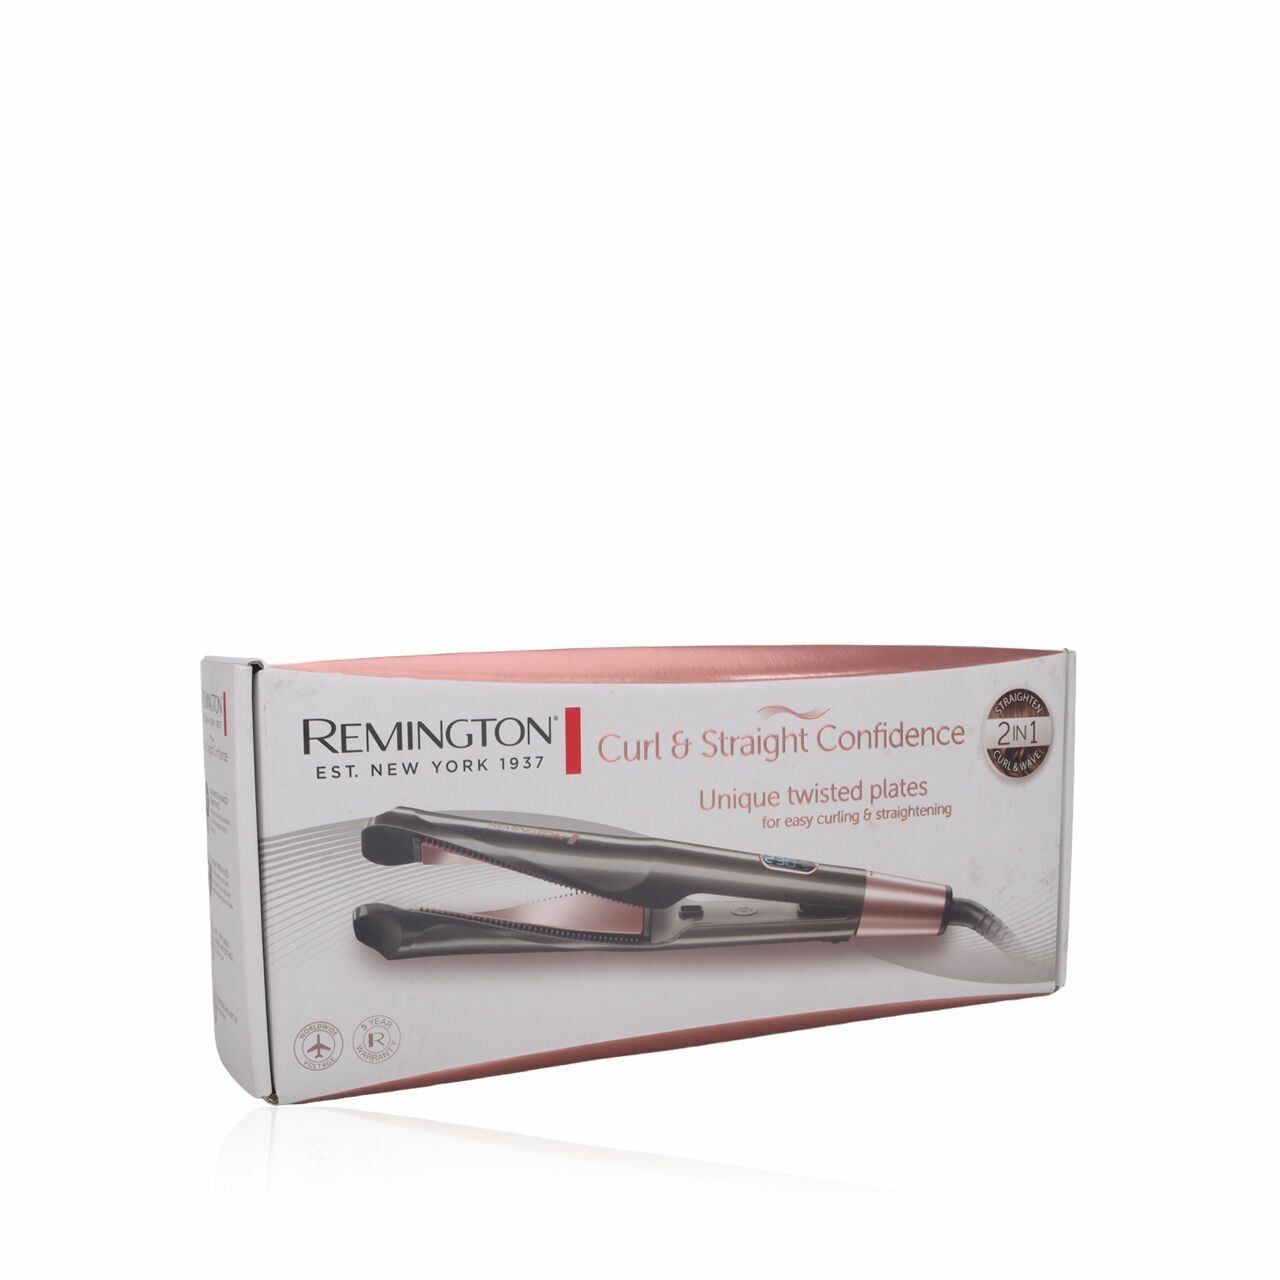 Remington Curl & Straight Confidence Hair Tools